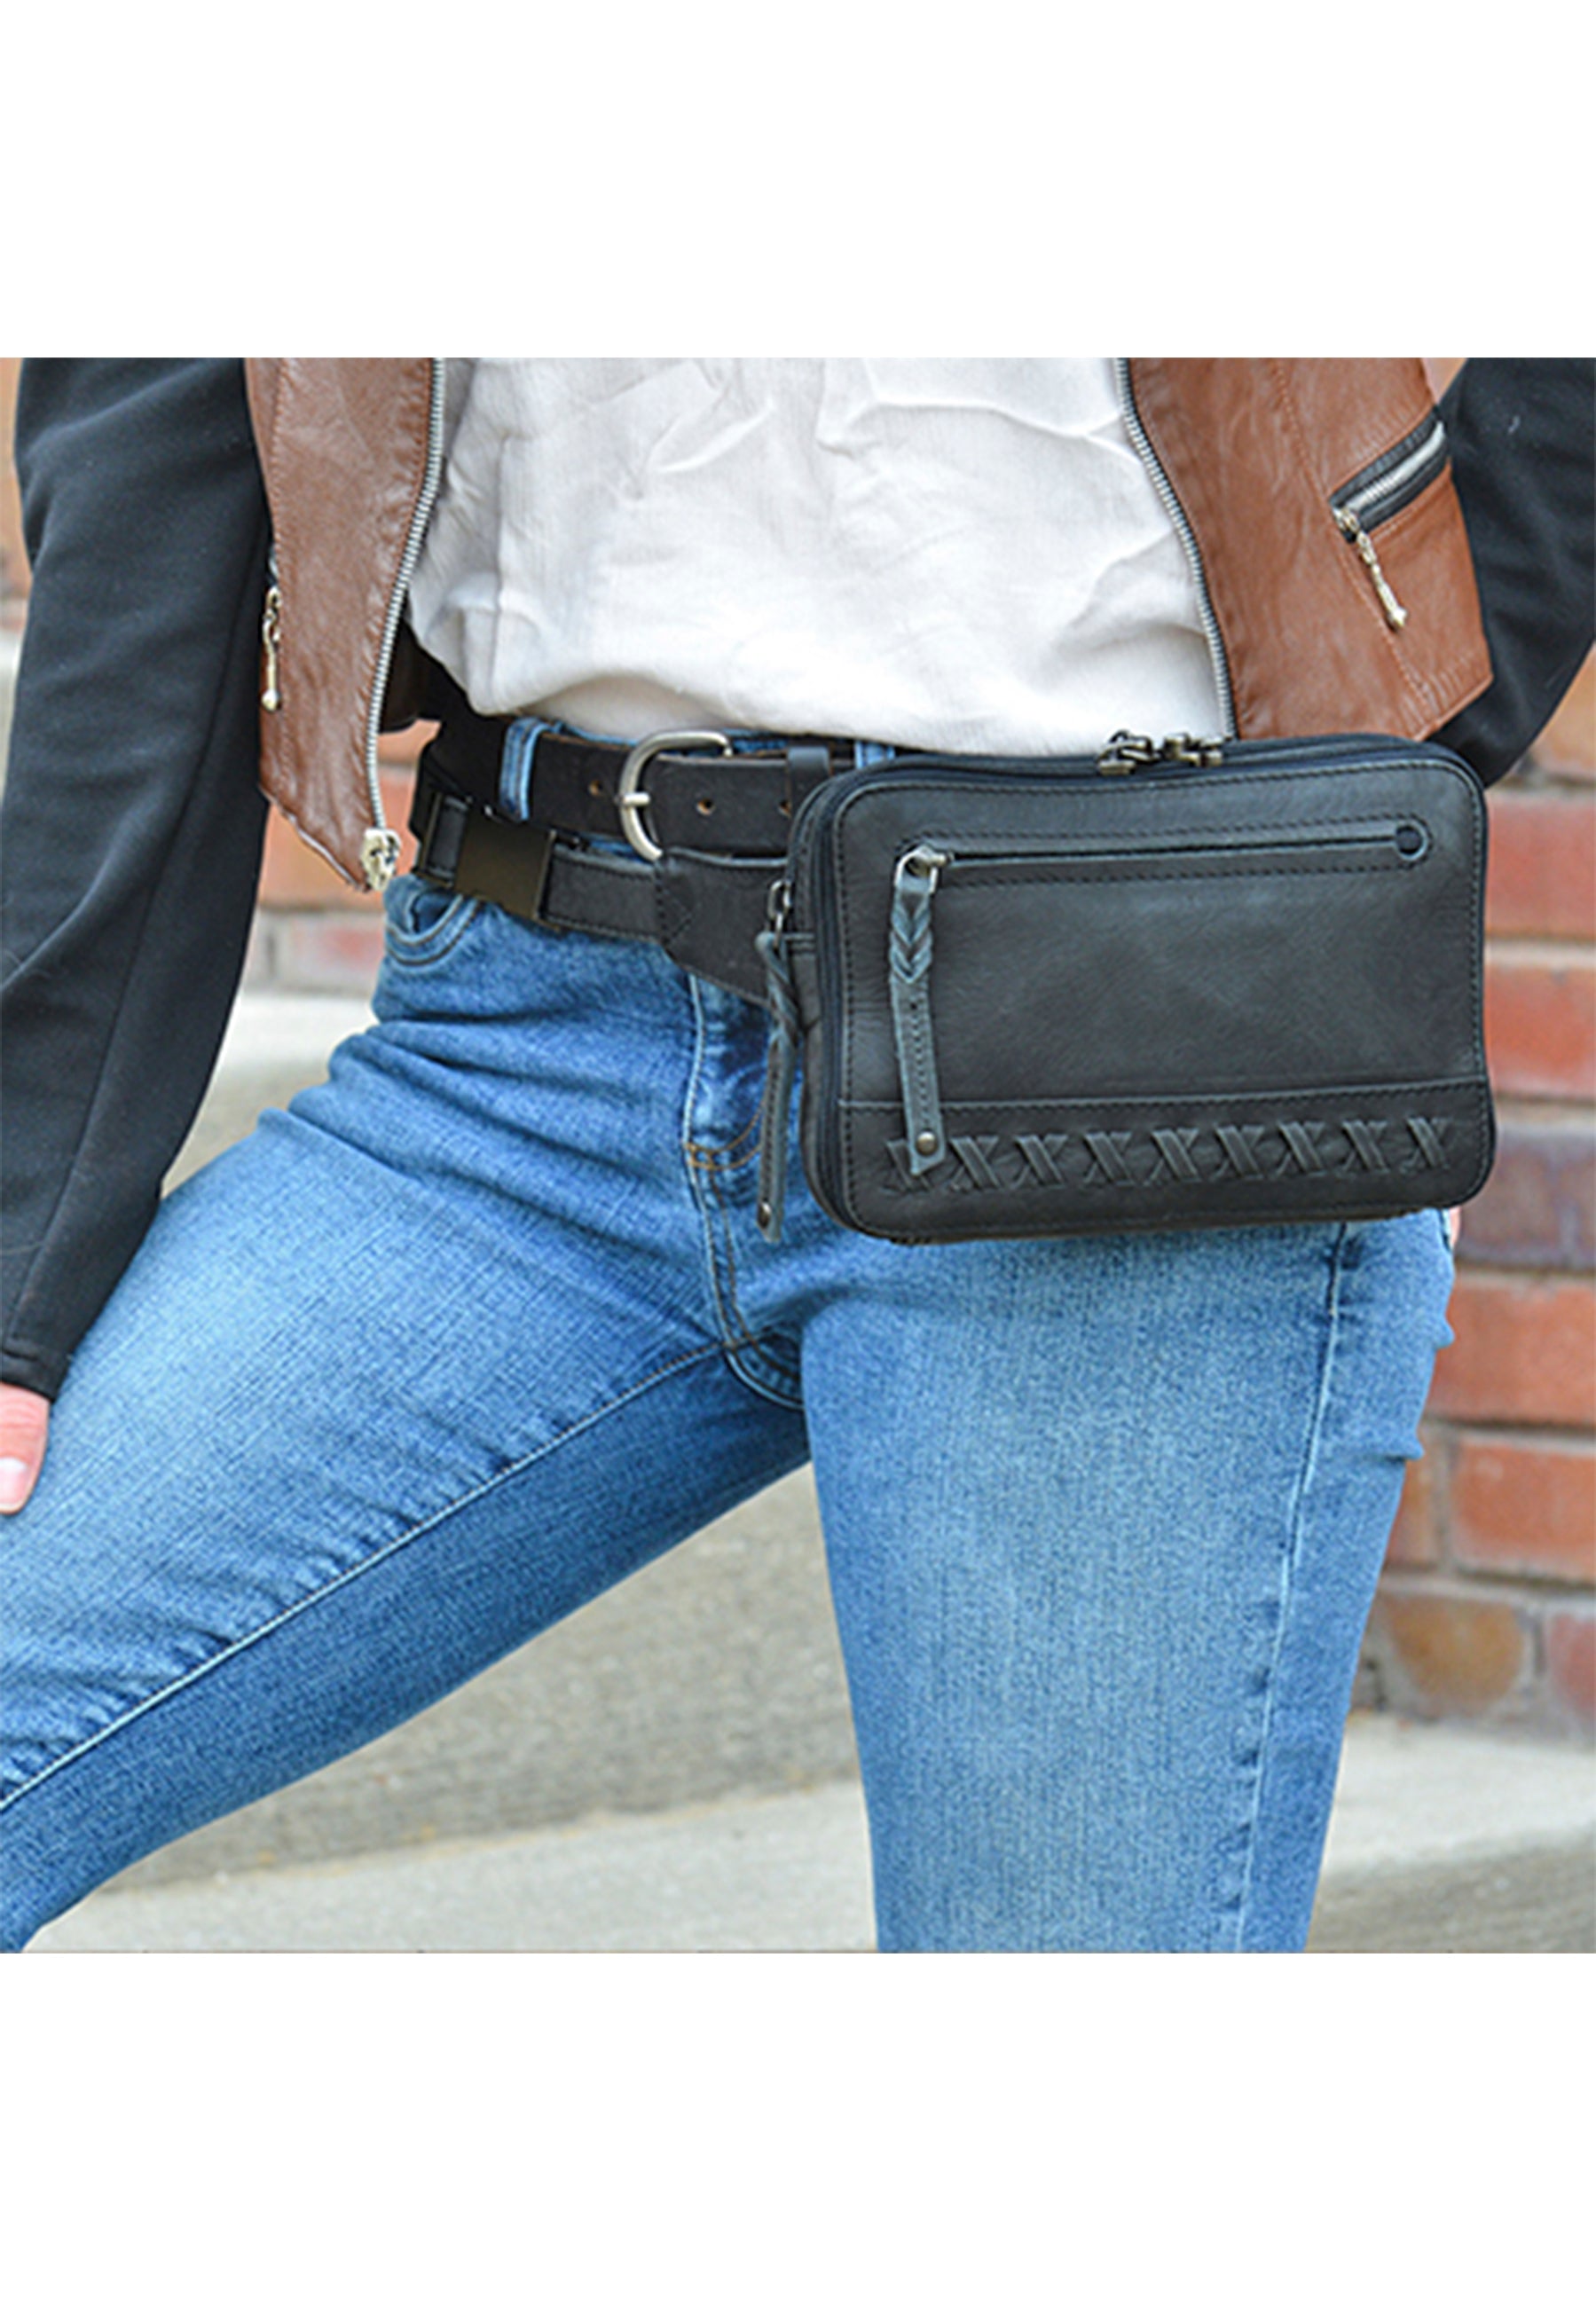 Model with leather concealed carry pack on her hip